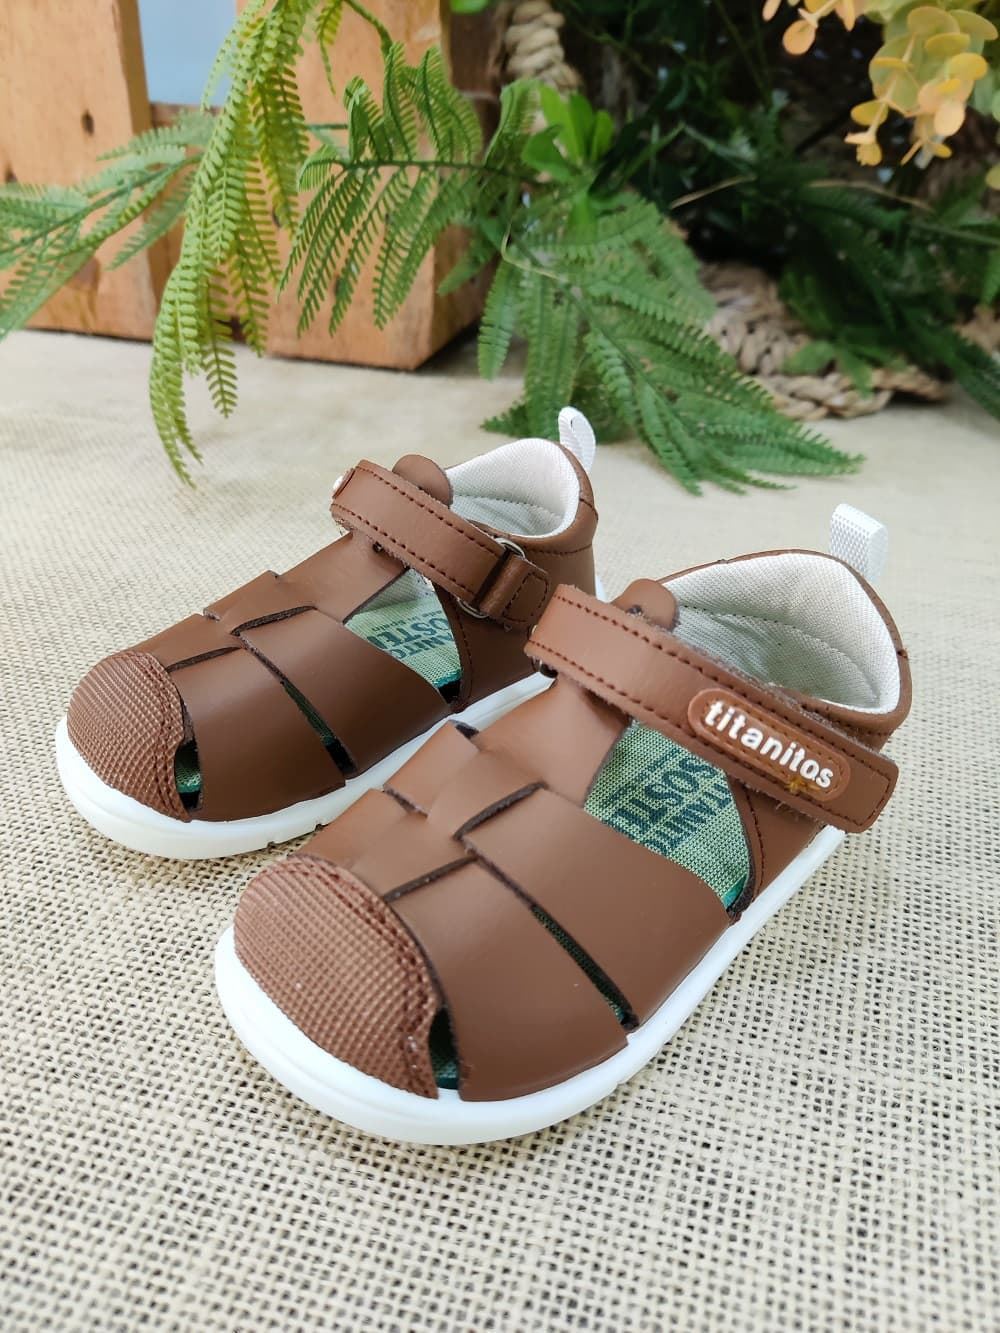 Titanitos Respectful baby sandals Eric Roble - Image 5